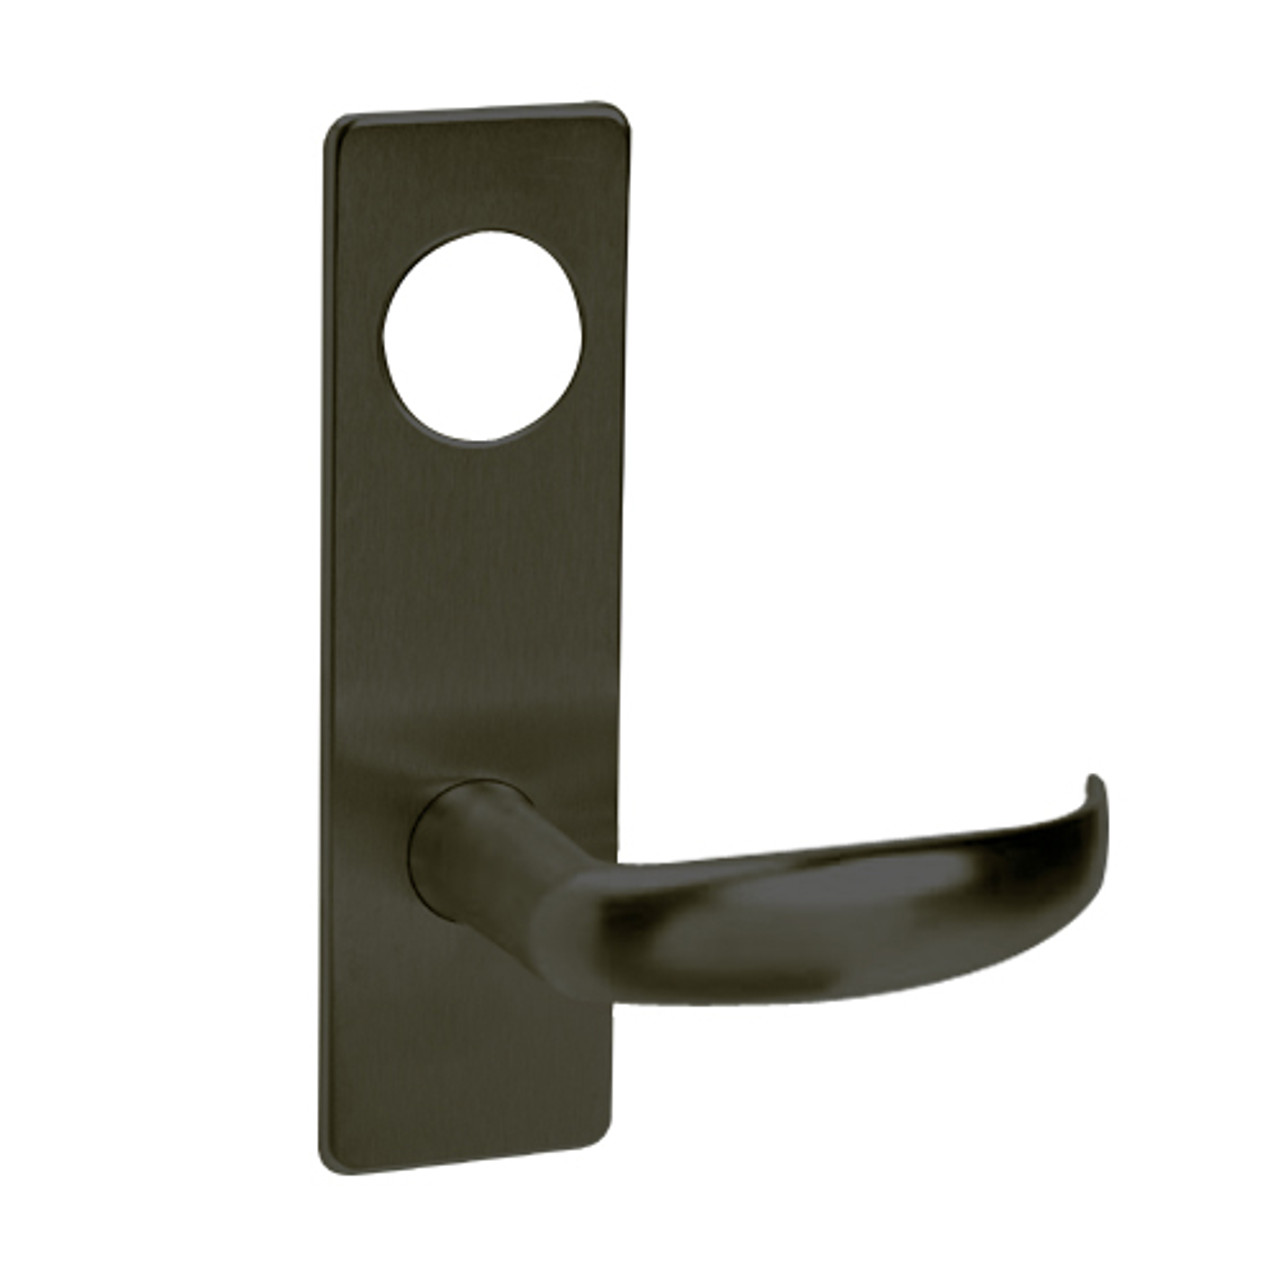 ML2042-PSM-613-CL6 Corbin Russwin ML2000 Series IC 6-Pin Less Core Mortise Entrance Locksets with Princeton Lever in Oil Rubbed Bronze